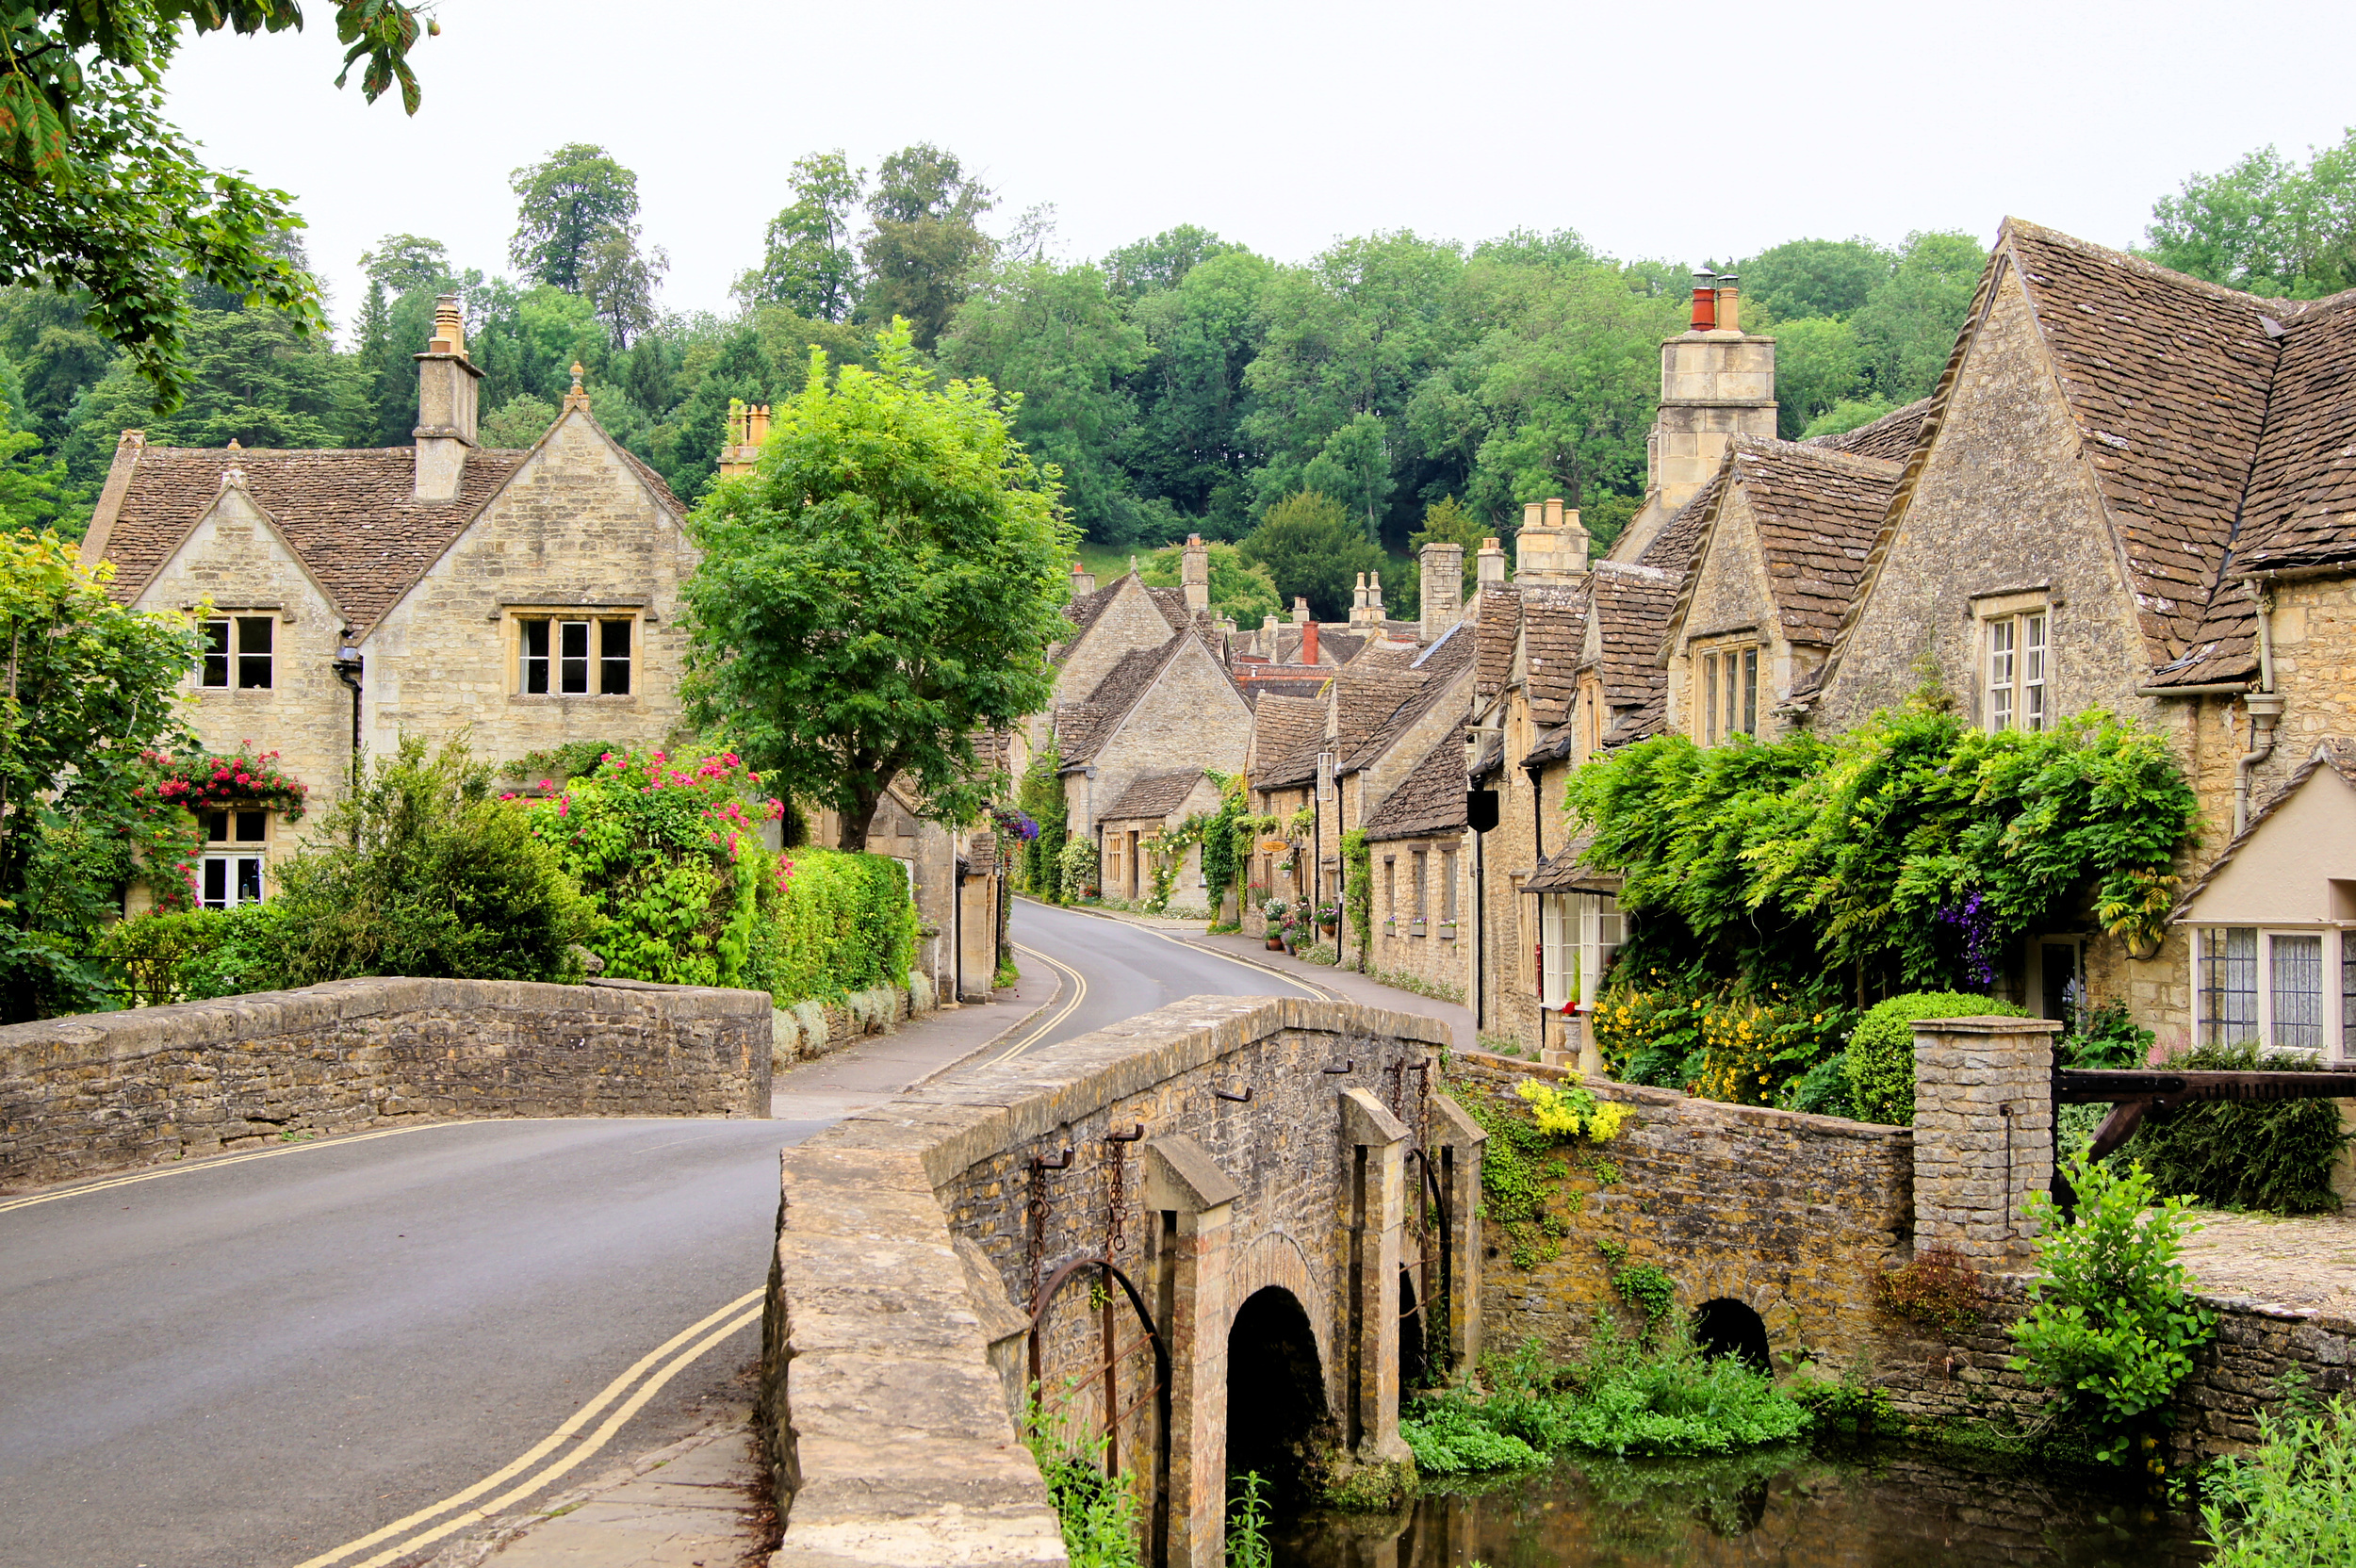 <p>This storybook part of the United Kingdom is full of adorable thatched cottages, scenic walking routes, and villages plucked from a Miss Marple episode. The towns are best explored with a car but can also be walked between if you’re keen on some hiking!</p><p>You may also like: <a href='https://www.yardbarker.com/lifestyle/articles/25_cooking_hacks_you_wont_believe_you_didnt_already_know_030124/s1__34563020'>25 cooking hacks you won’t believe you didn’t already know</a></p>